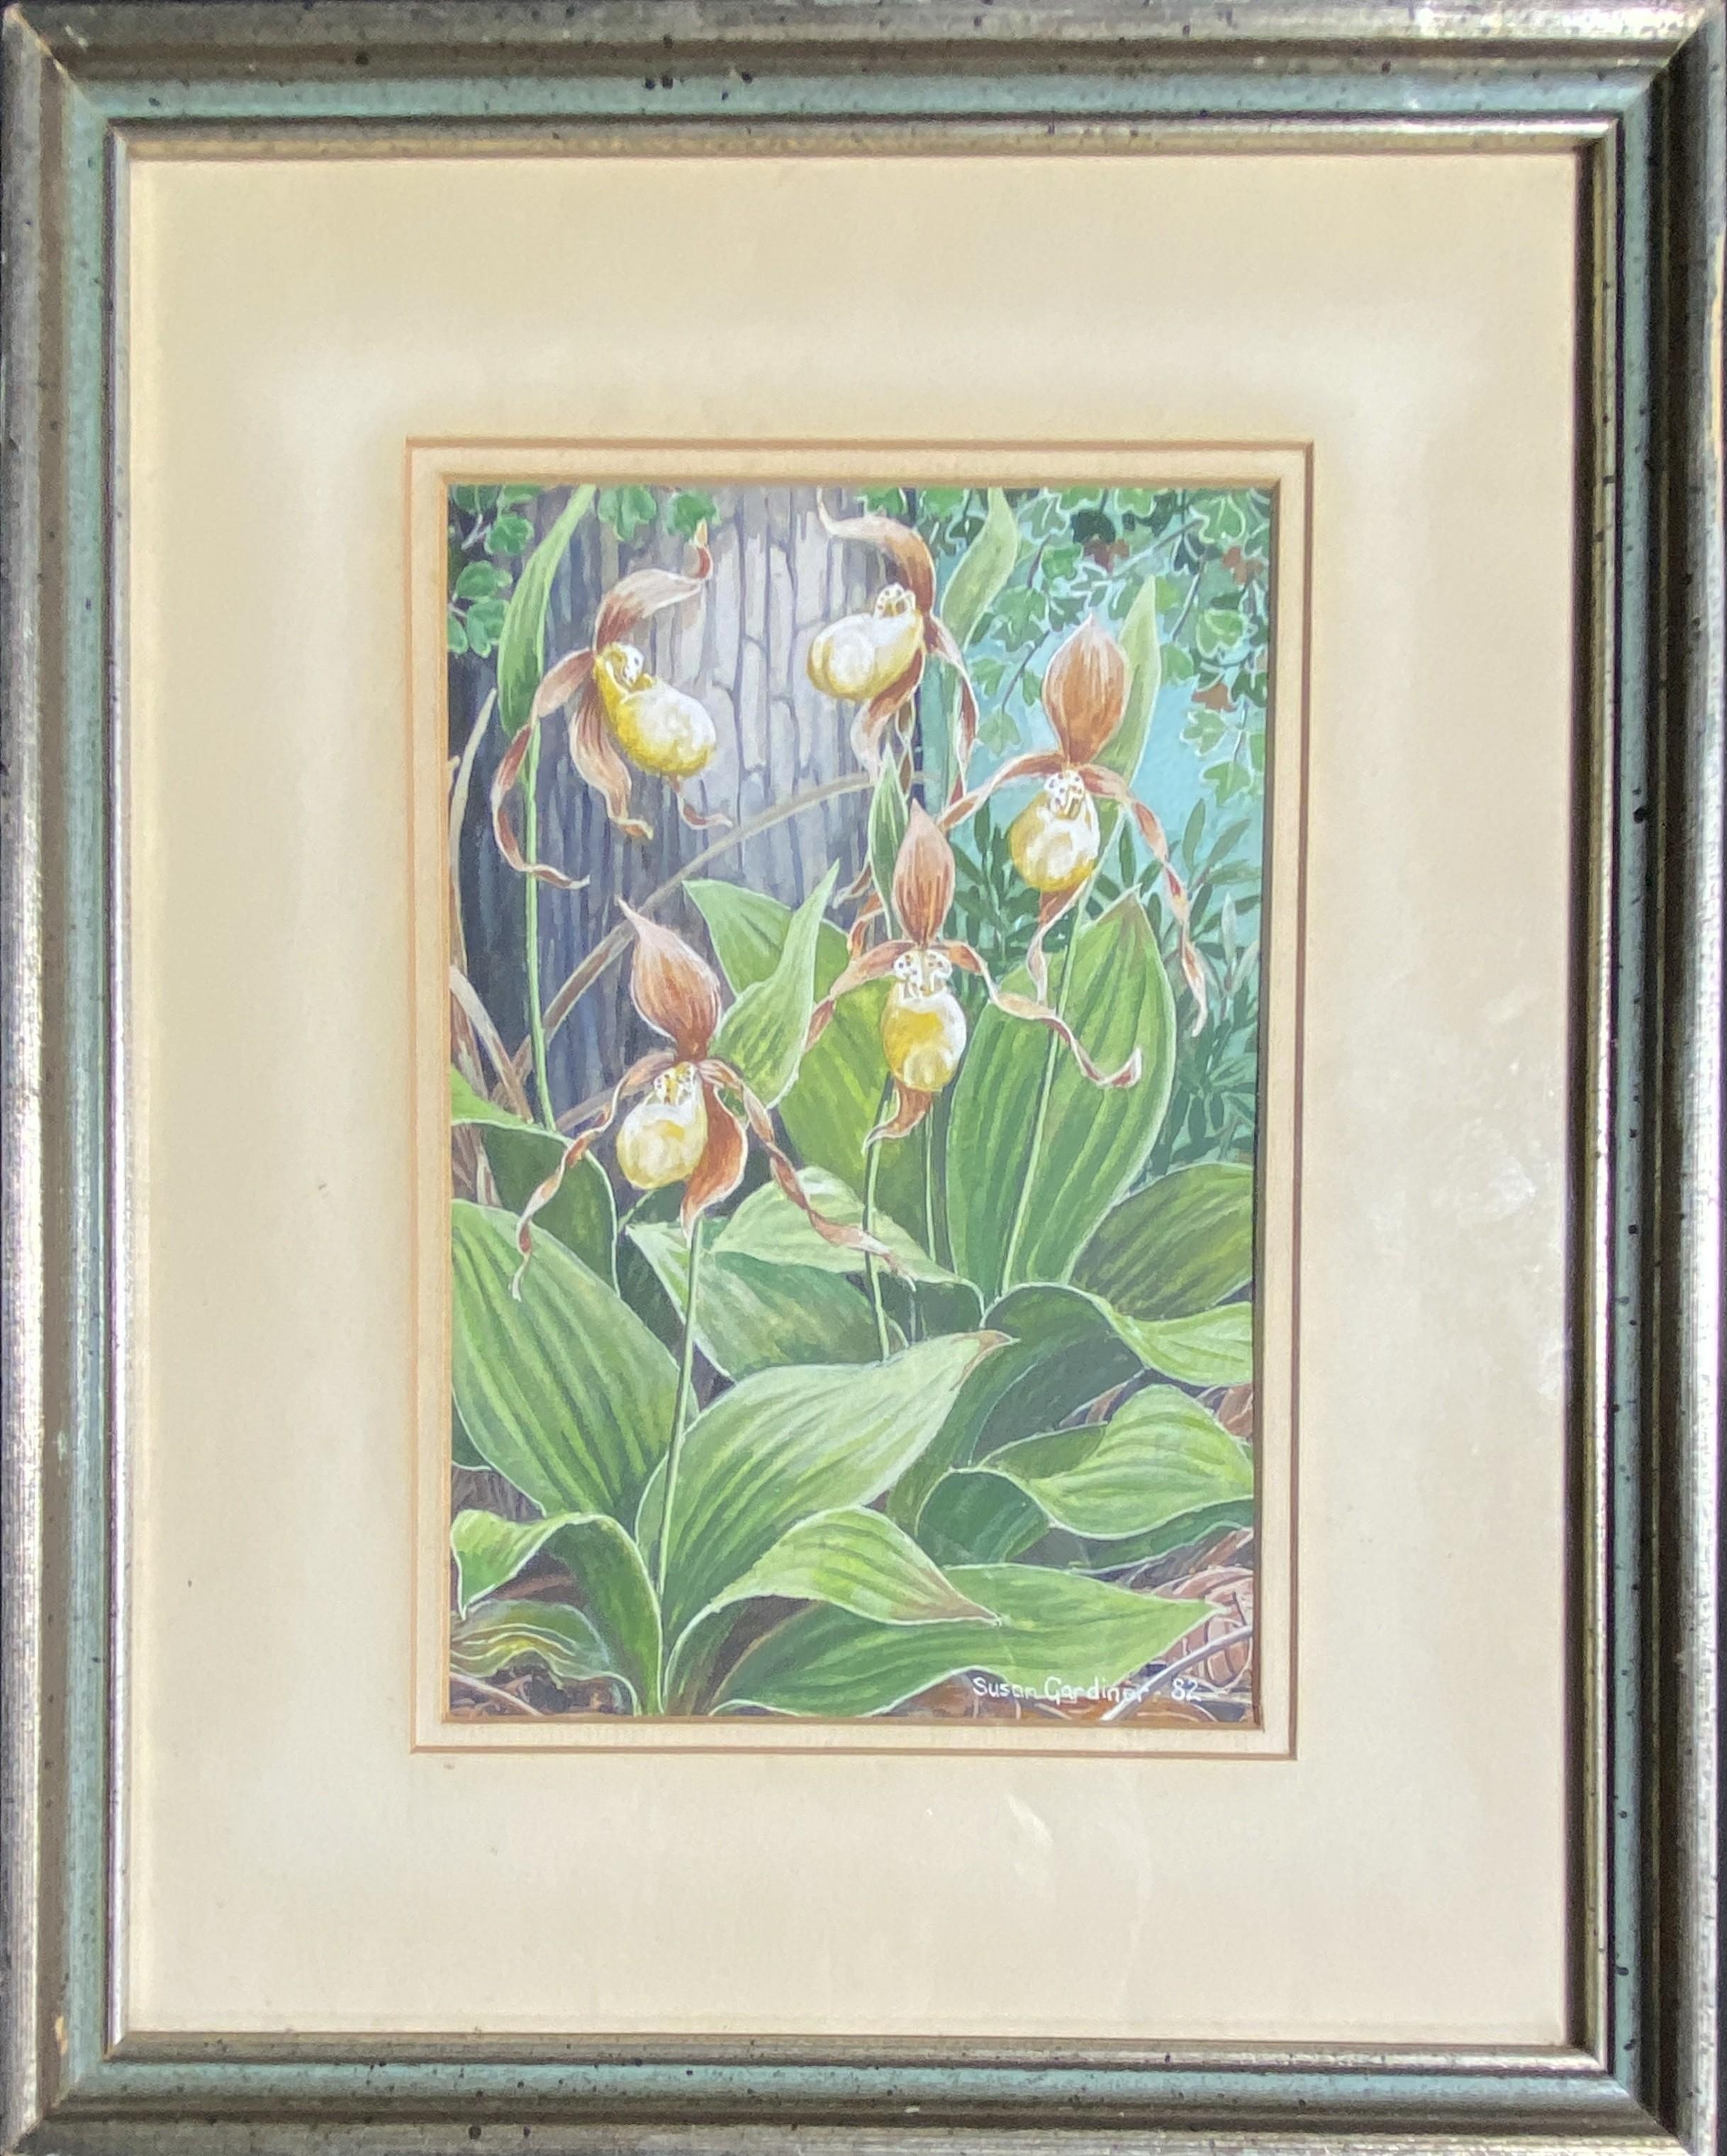 Artwork by Susan Gardner, Yellow Lady's Slipper - Cypripedium Calceolus 1982, Made of Watercolour on paper